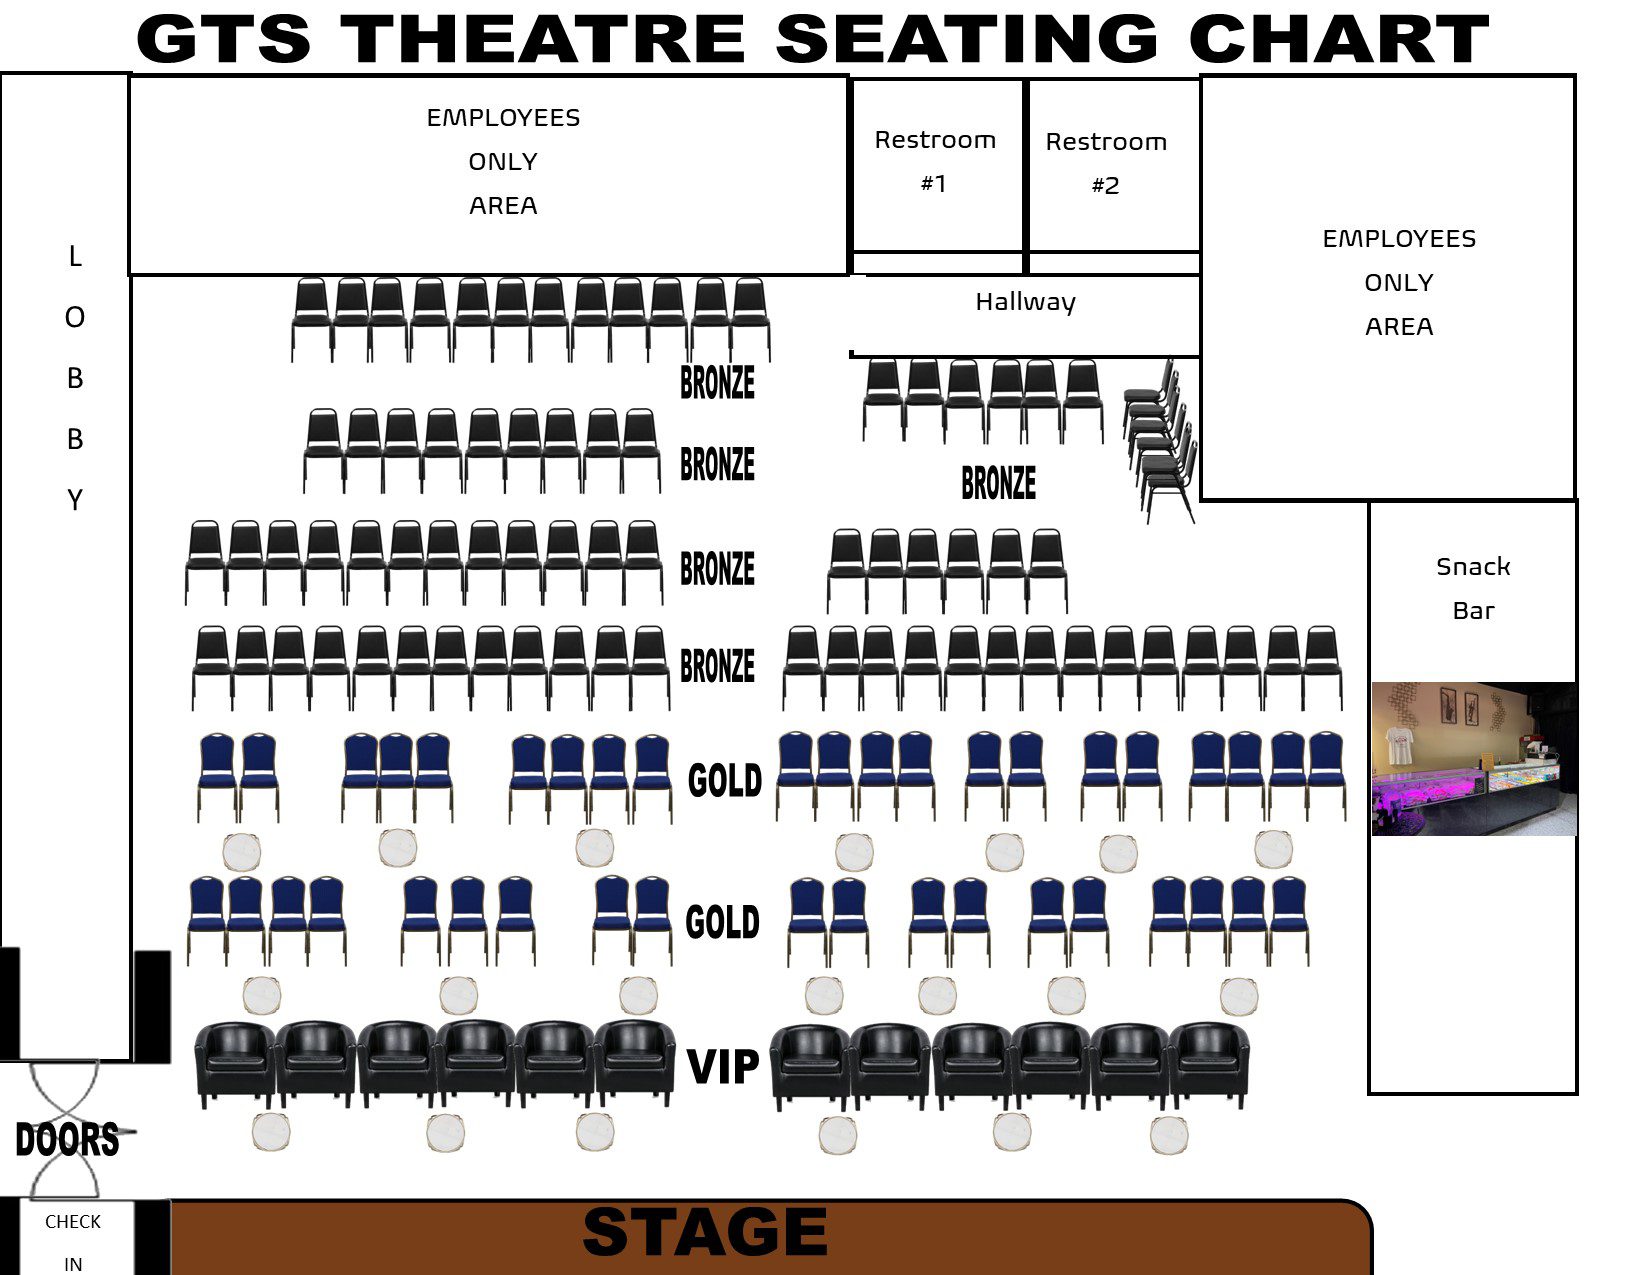 GTS Theatre Seating Chart 2022